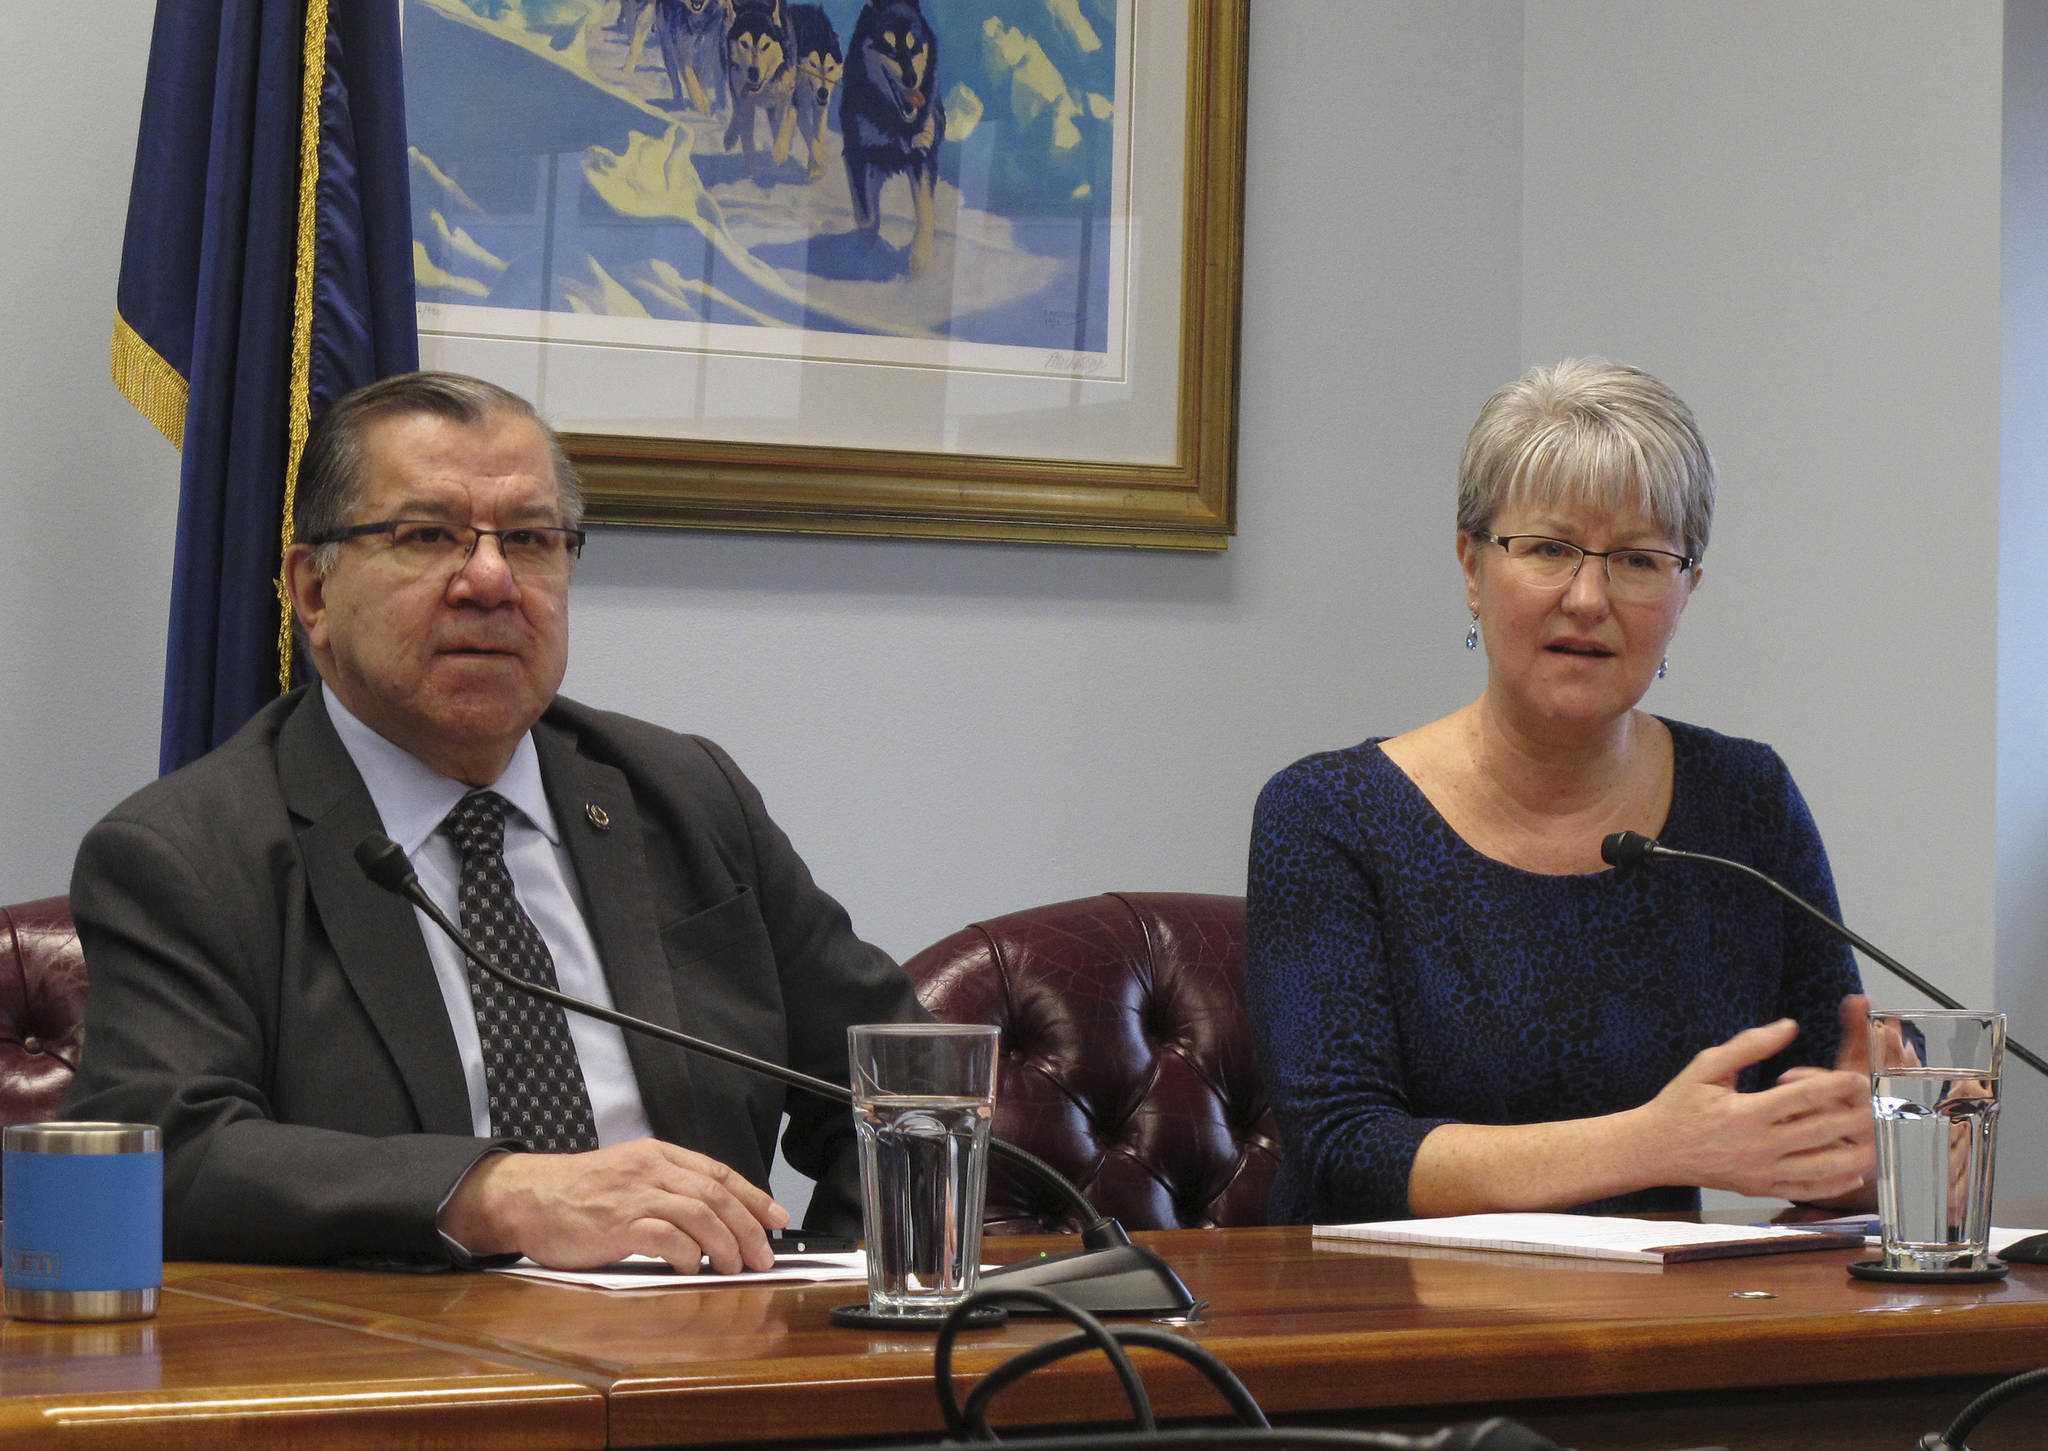 Alaska Senate Finance Committee co-chair Anna MacKinnon, right, answers a question during the Senate majority’s weekly news conference on Monday, April 9, 2018, in Juneau, Alaska. Topics covered during the event included caucus priorities as the scheduled end of the legislative session nears. Also pictured is MacKinnon’s finance co-chair, Sen. Lyman Hoffman. (AP Photo/Becky Bohrer)